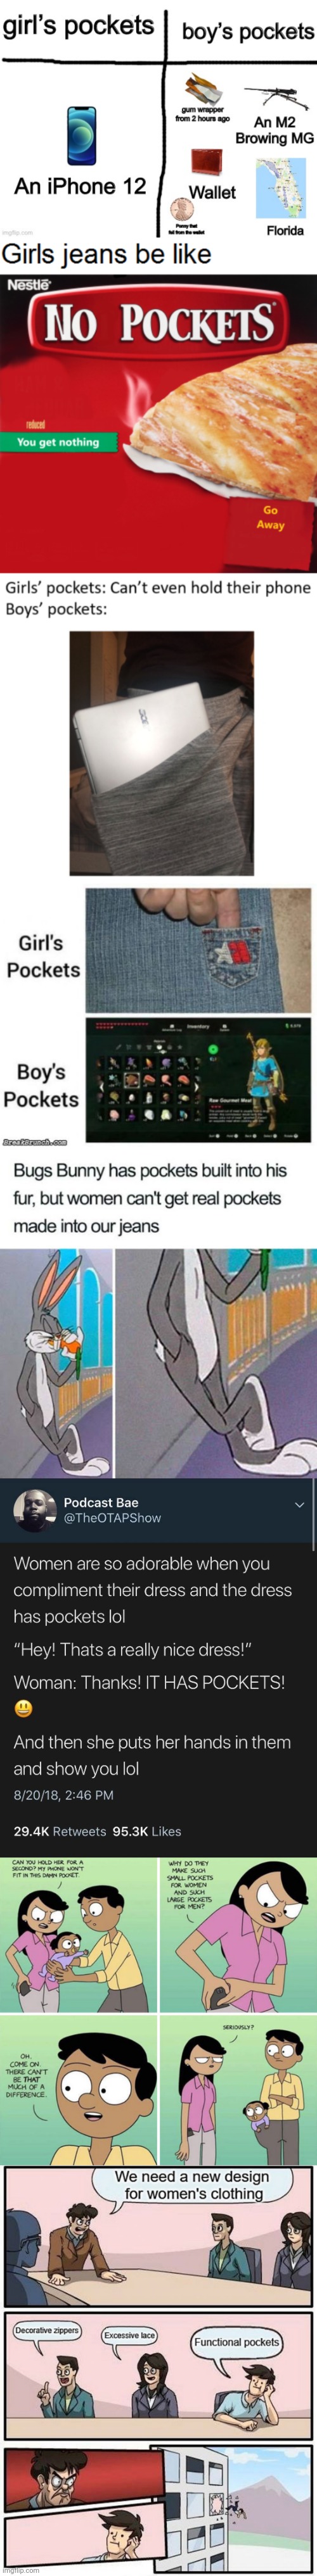 Saw this meme today and it triggered me | image tagged in women's pockets,men's pockets,triggered,runway fashion | made w/ Imgflip meme maker